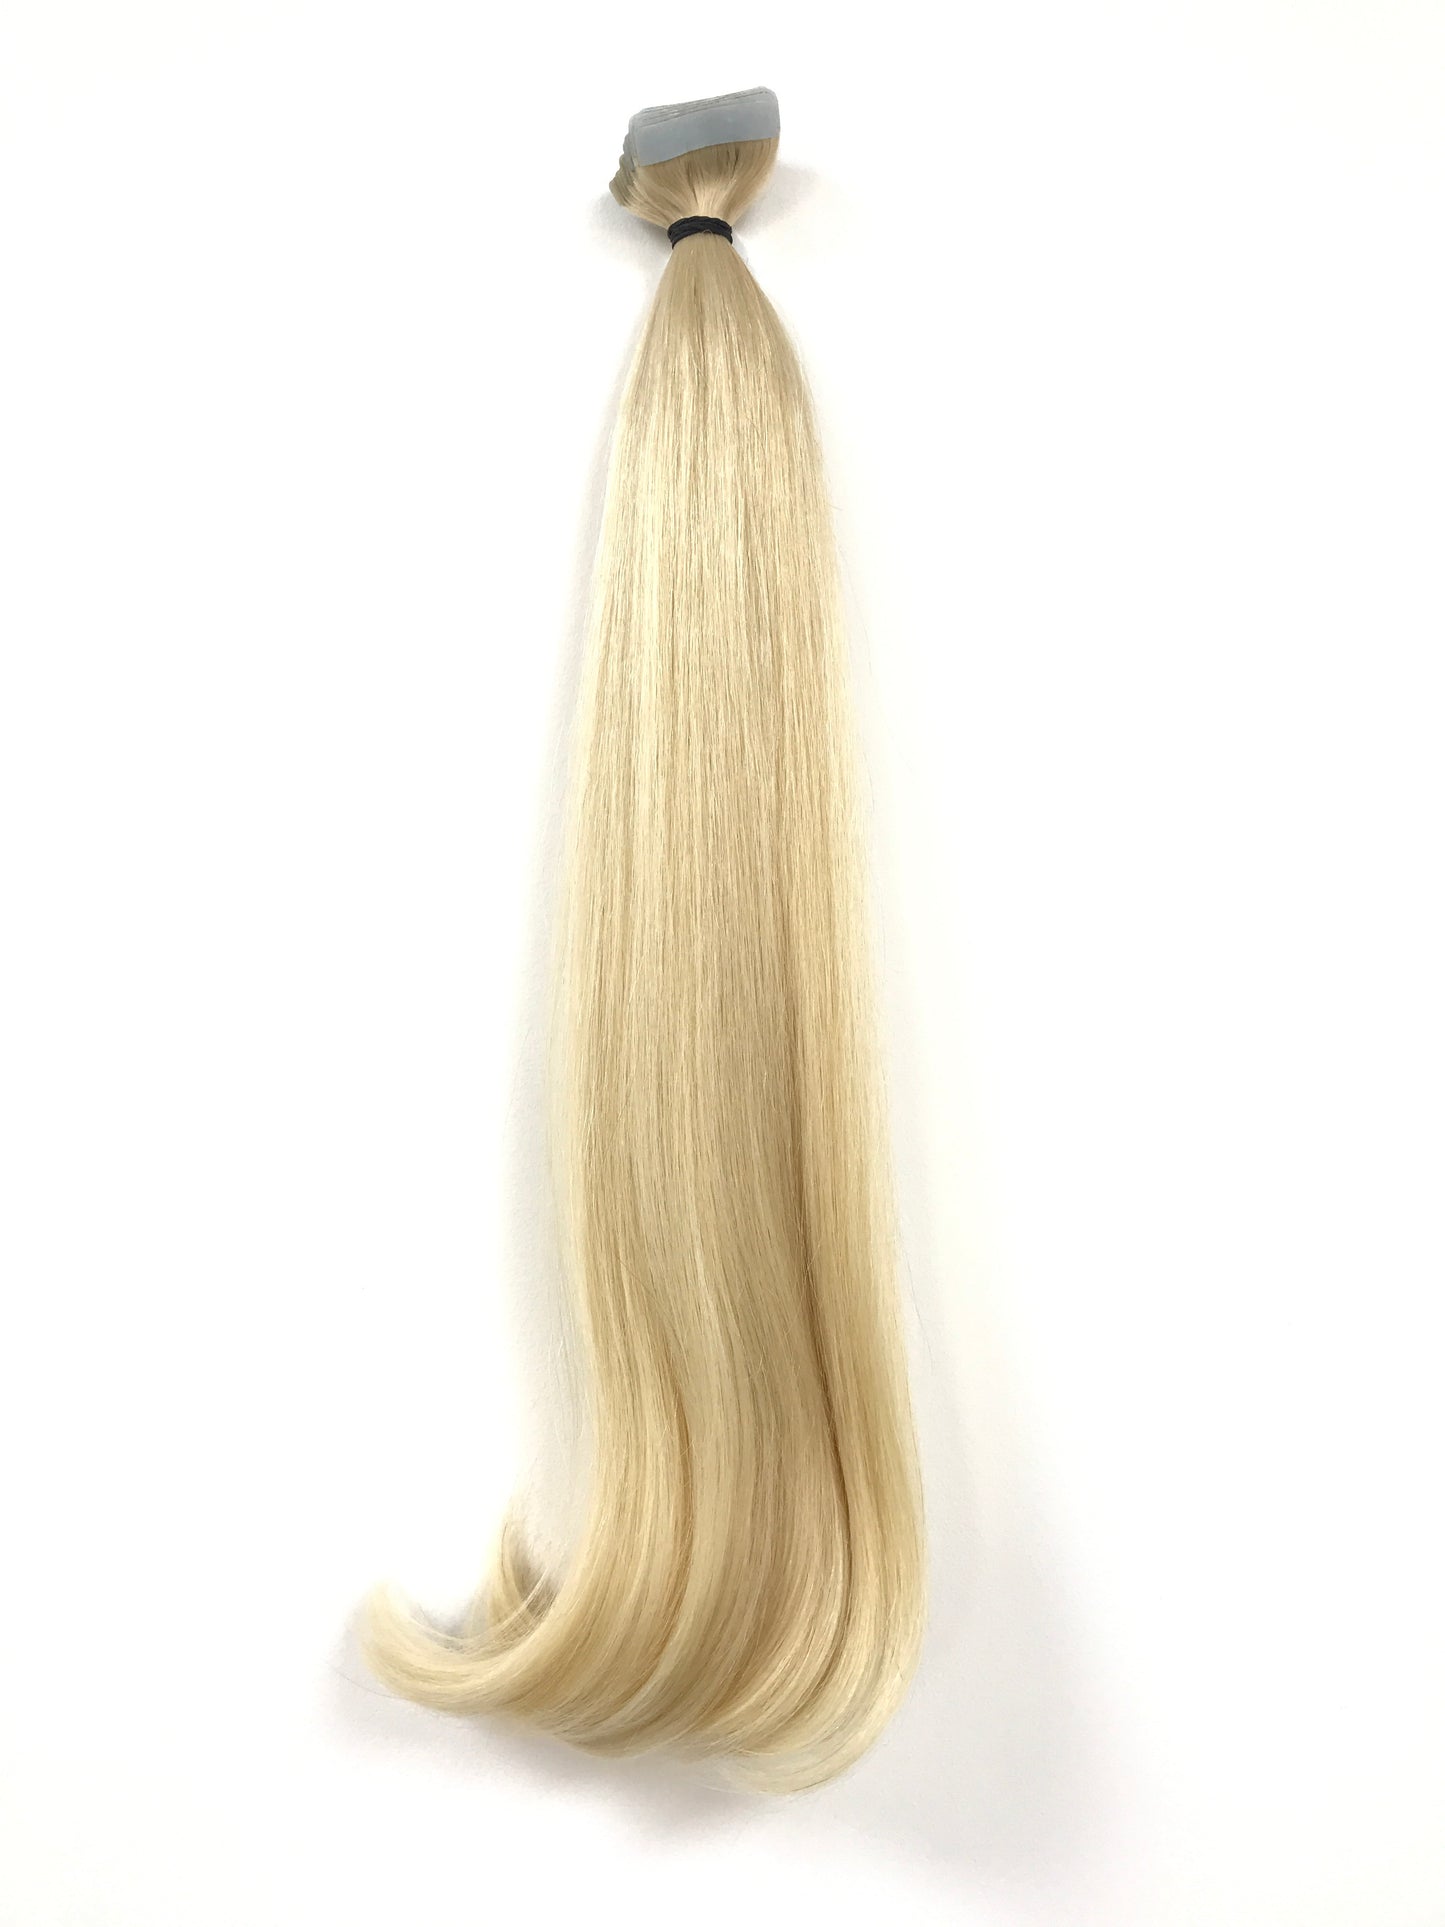 Russian Virgin Remy Human Hair, Tape Extensions, Straight, 18'', Blonde. Quick Shipping!-Virgin Hair & Beauty, The Best Hair Extensions, Real Virgin Human Hair.